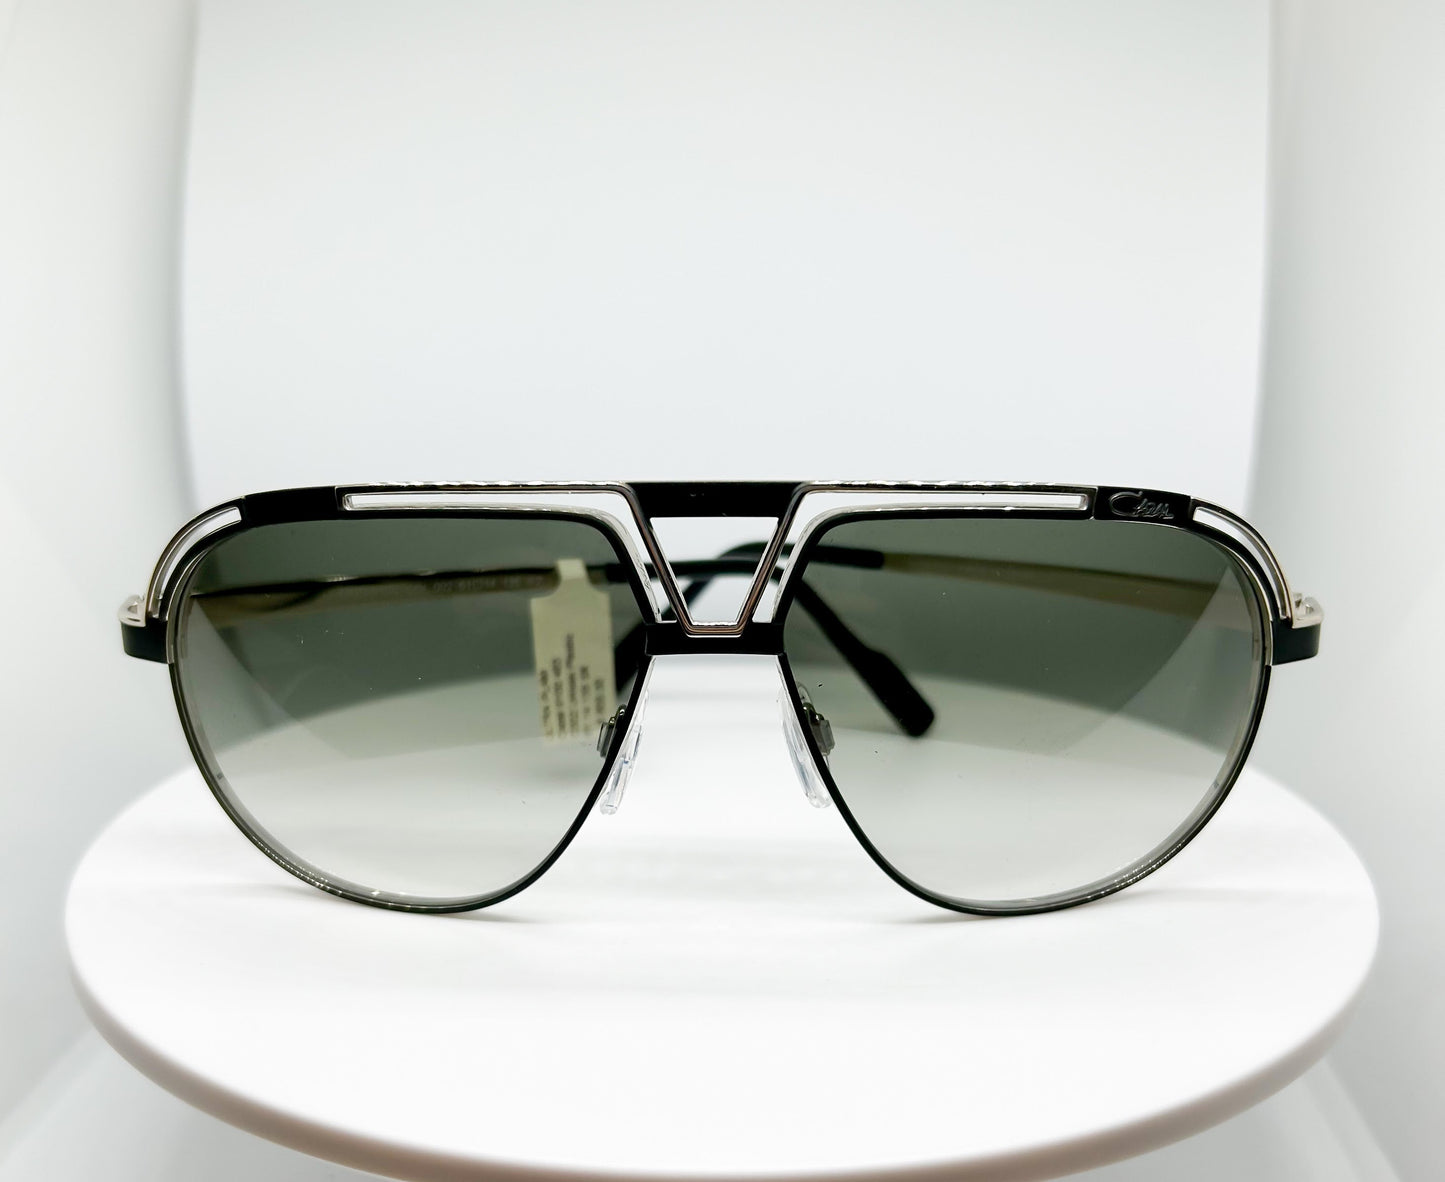 <p>CAZAL Ultra Plam is a  Black, Silver,  Acetate, Titanium Sunglasses Frame with a Oval shape.  </p><p>Shop with confidence from Adair Eyewear, a CAZAL Authorized Dealer.  We have provided the best in customer service and great designer eyweear for over 40 years.</p>